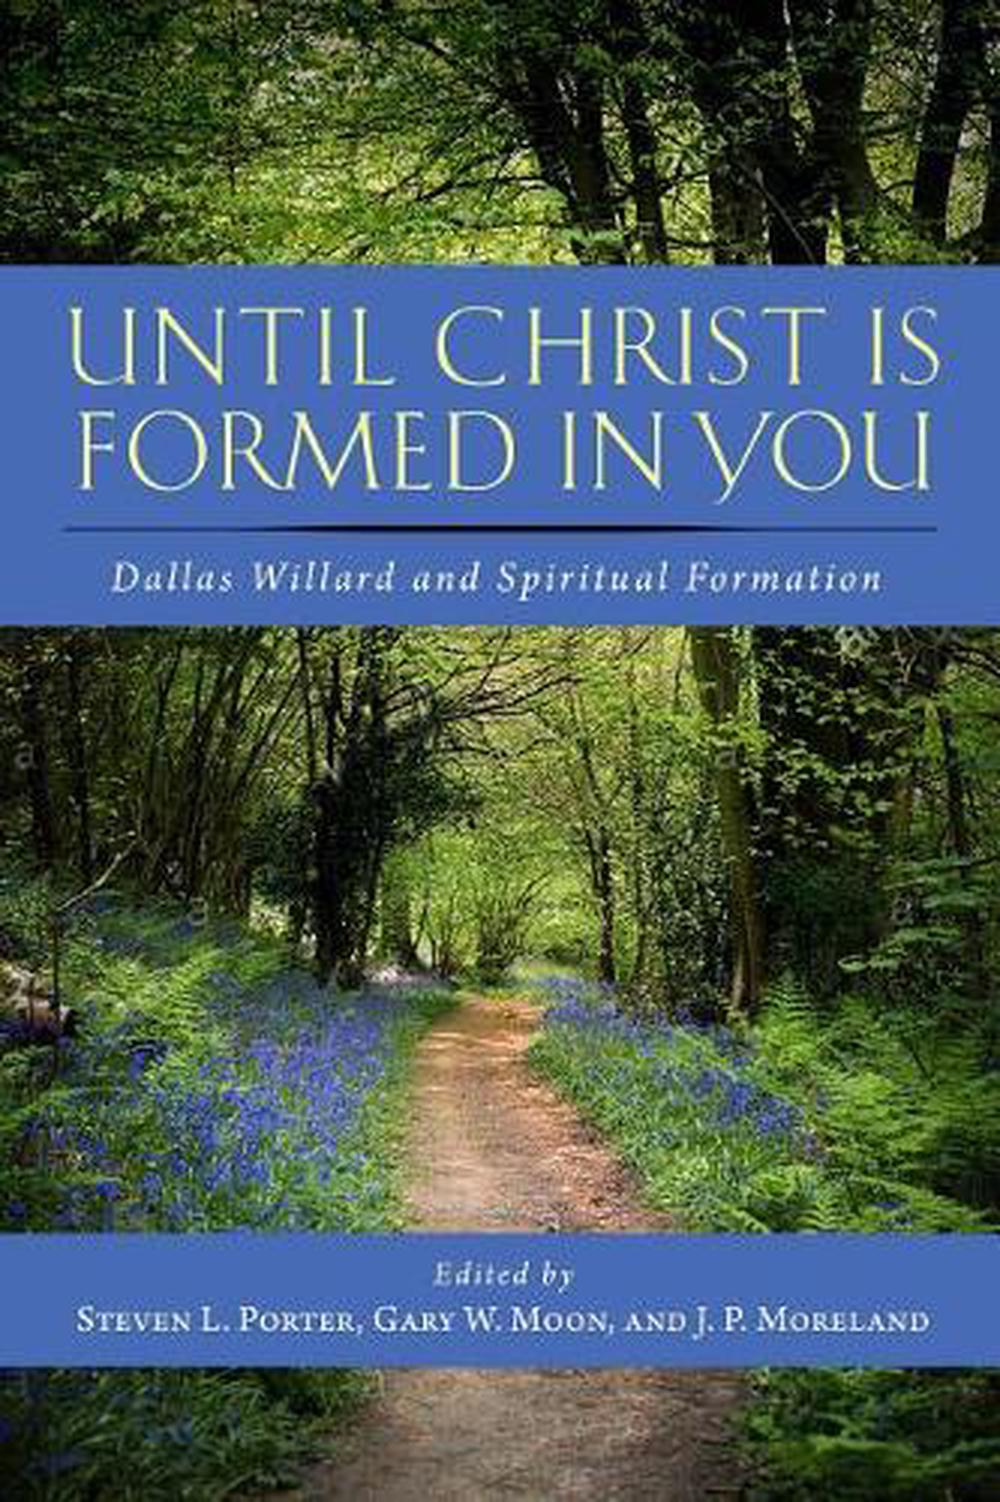 until-christ-is-formed-in-you-dallas-willard-and-spiritual-formation